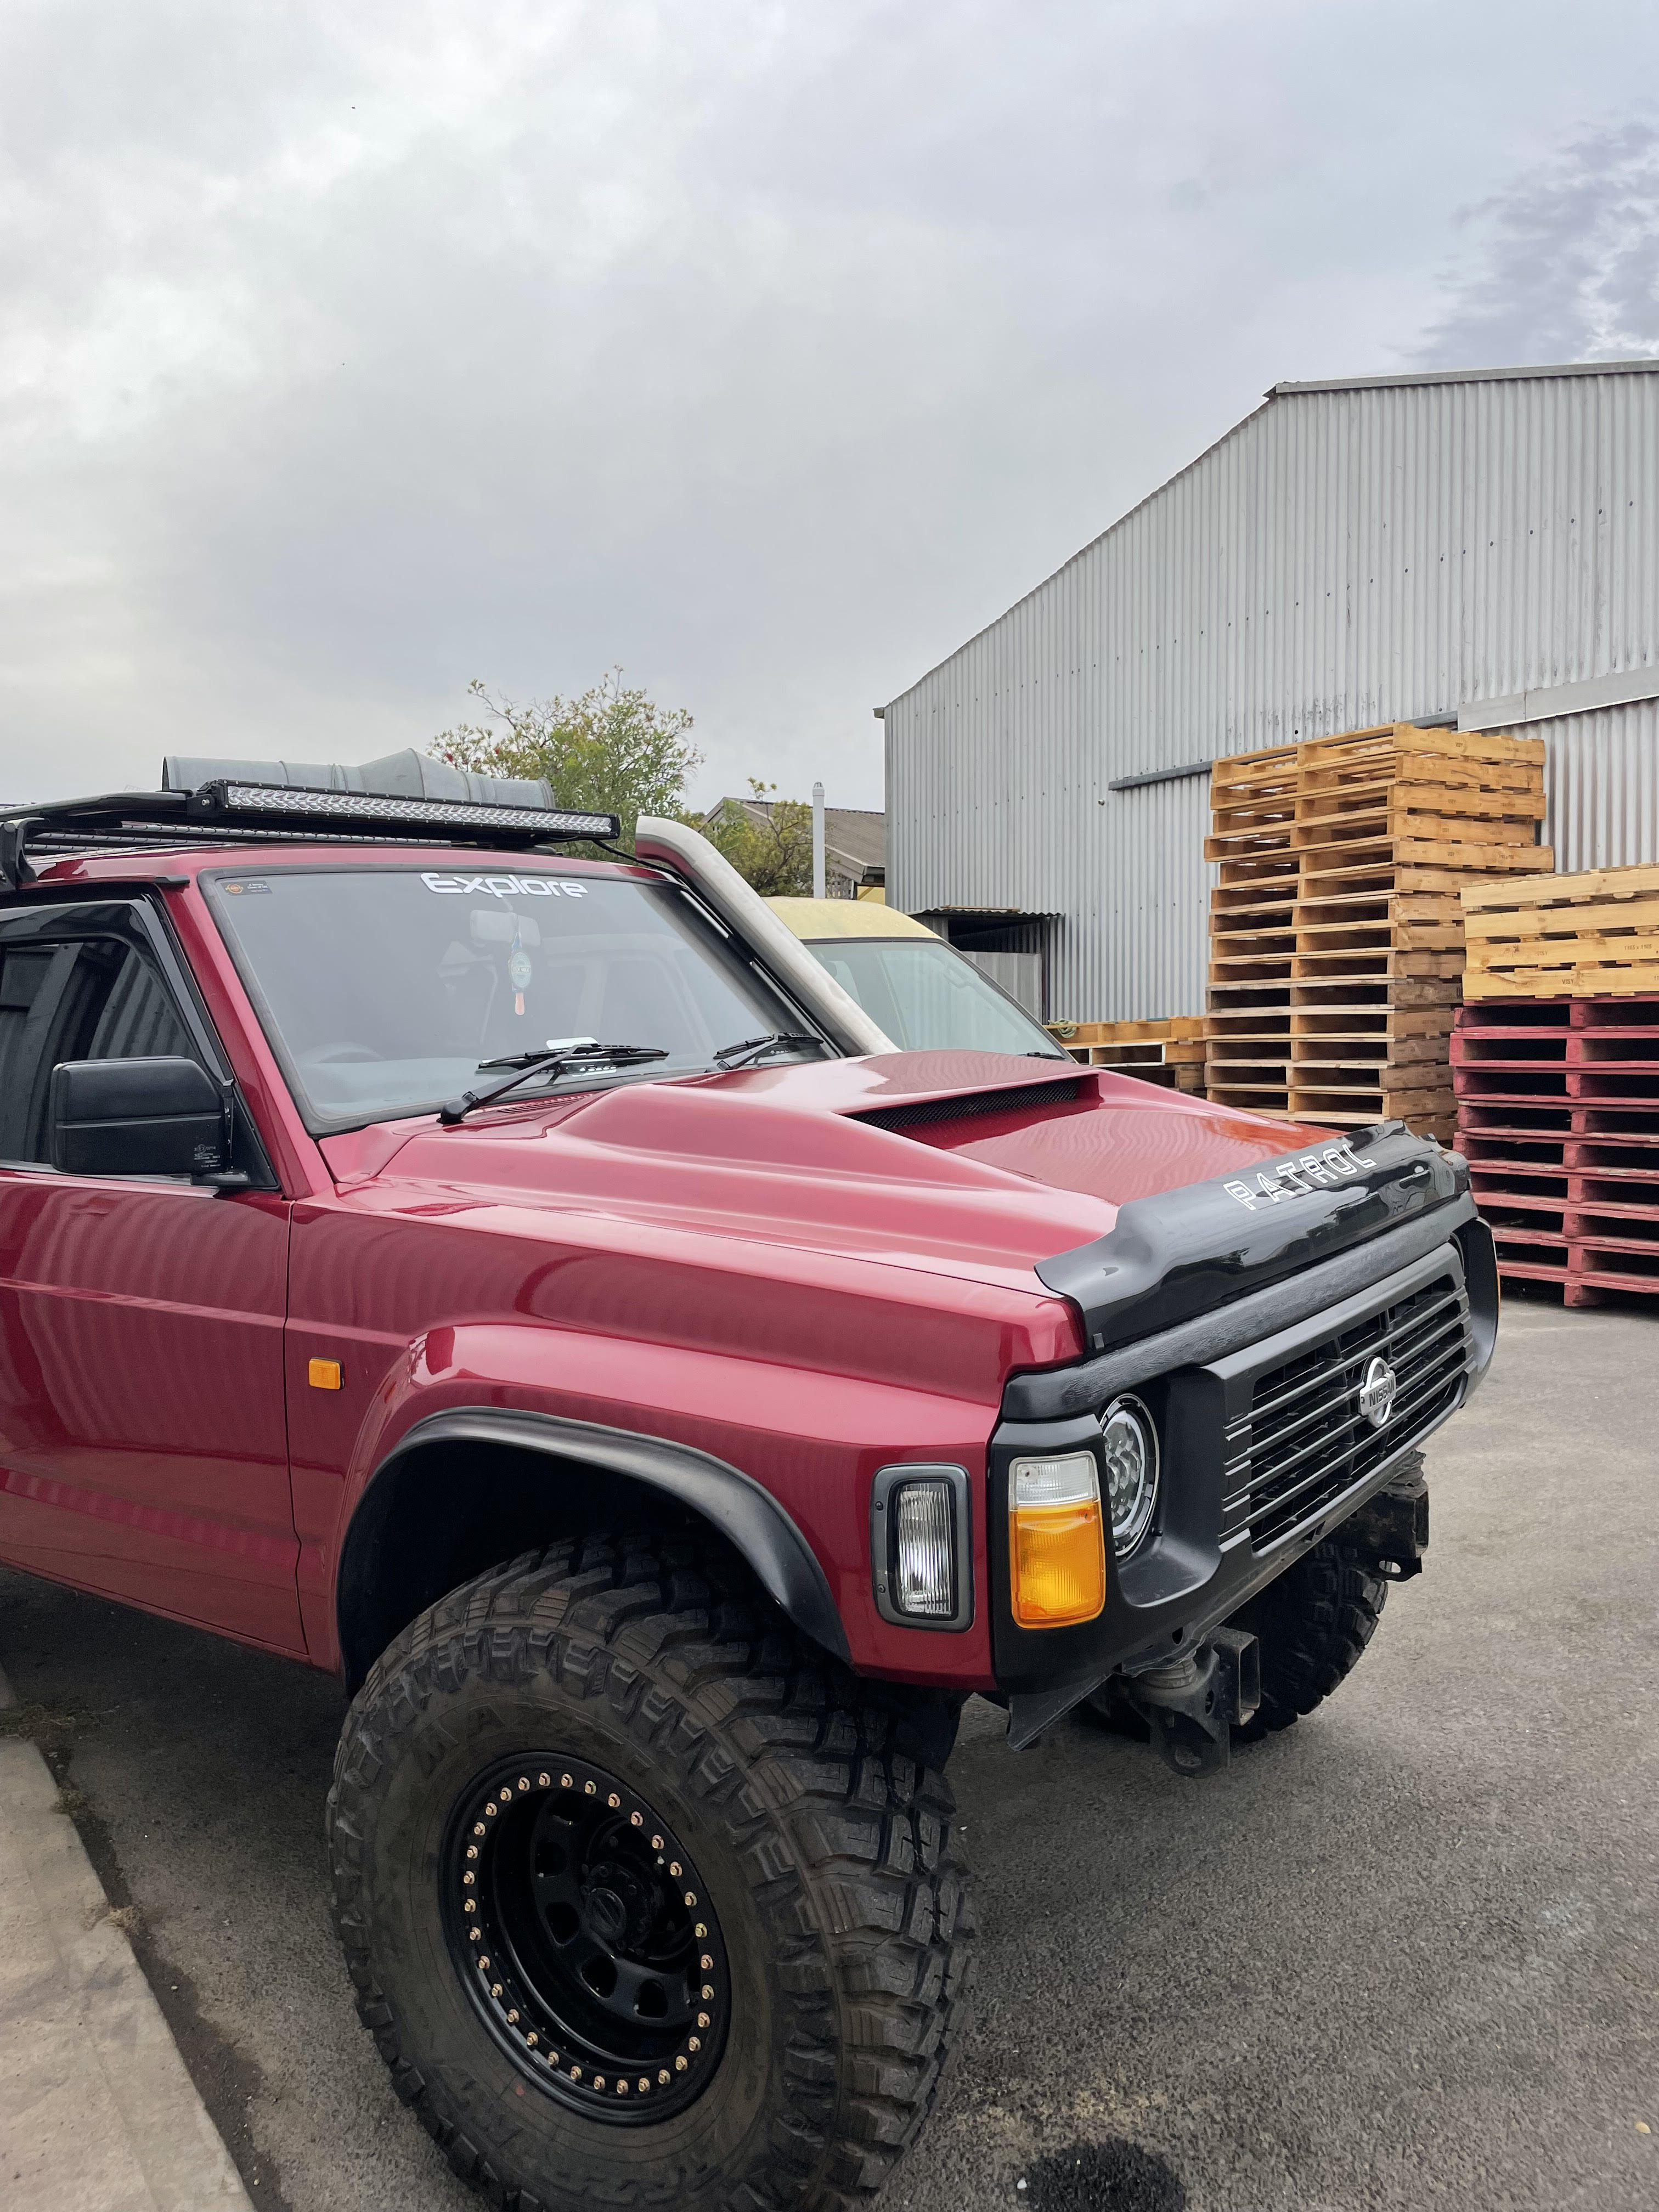 4WD 79 series style V8 Scoop to suit GQ Patrol